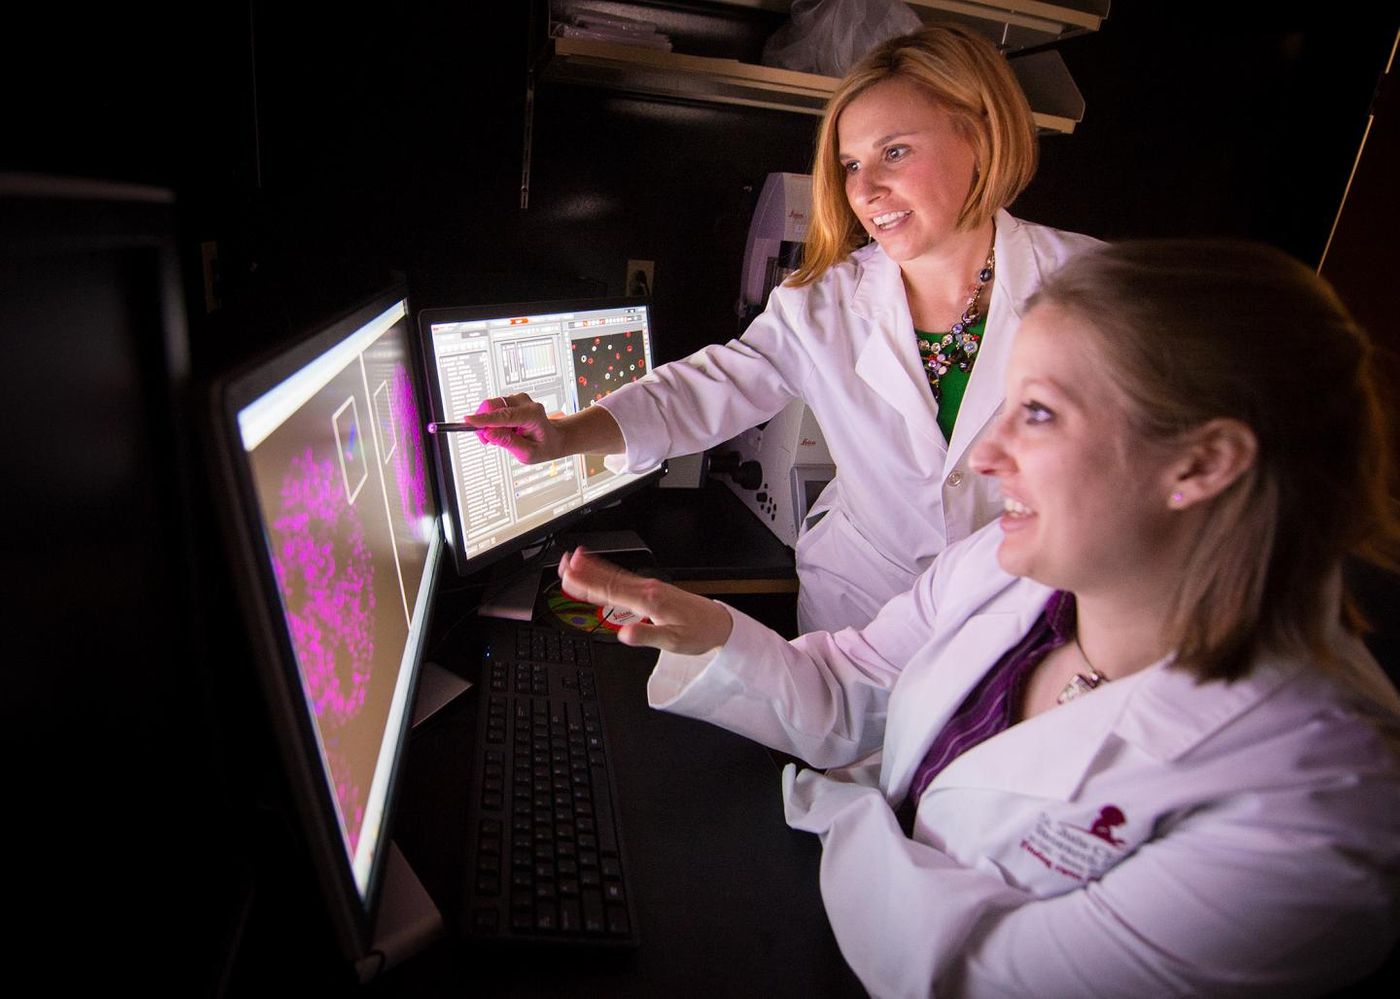 This image shows first author Angela Arensdorf, Ph.D., and corresponding author Stacey Ogden, Ph.D., an associate member of the St. Jude Department of Cell and Molecular Biology. / Credit: Peter Barta / St. Jude Children's Research Hospital